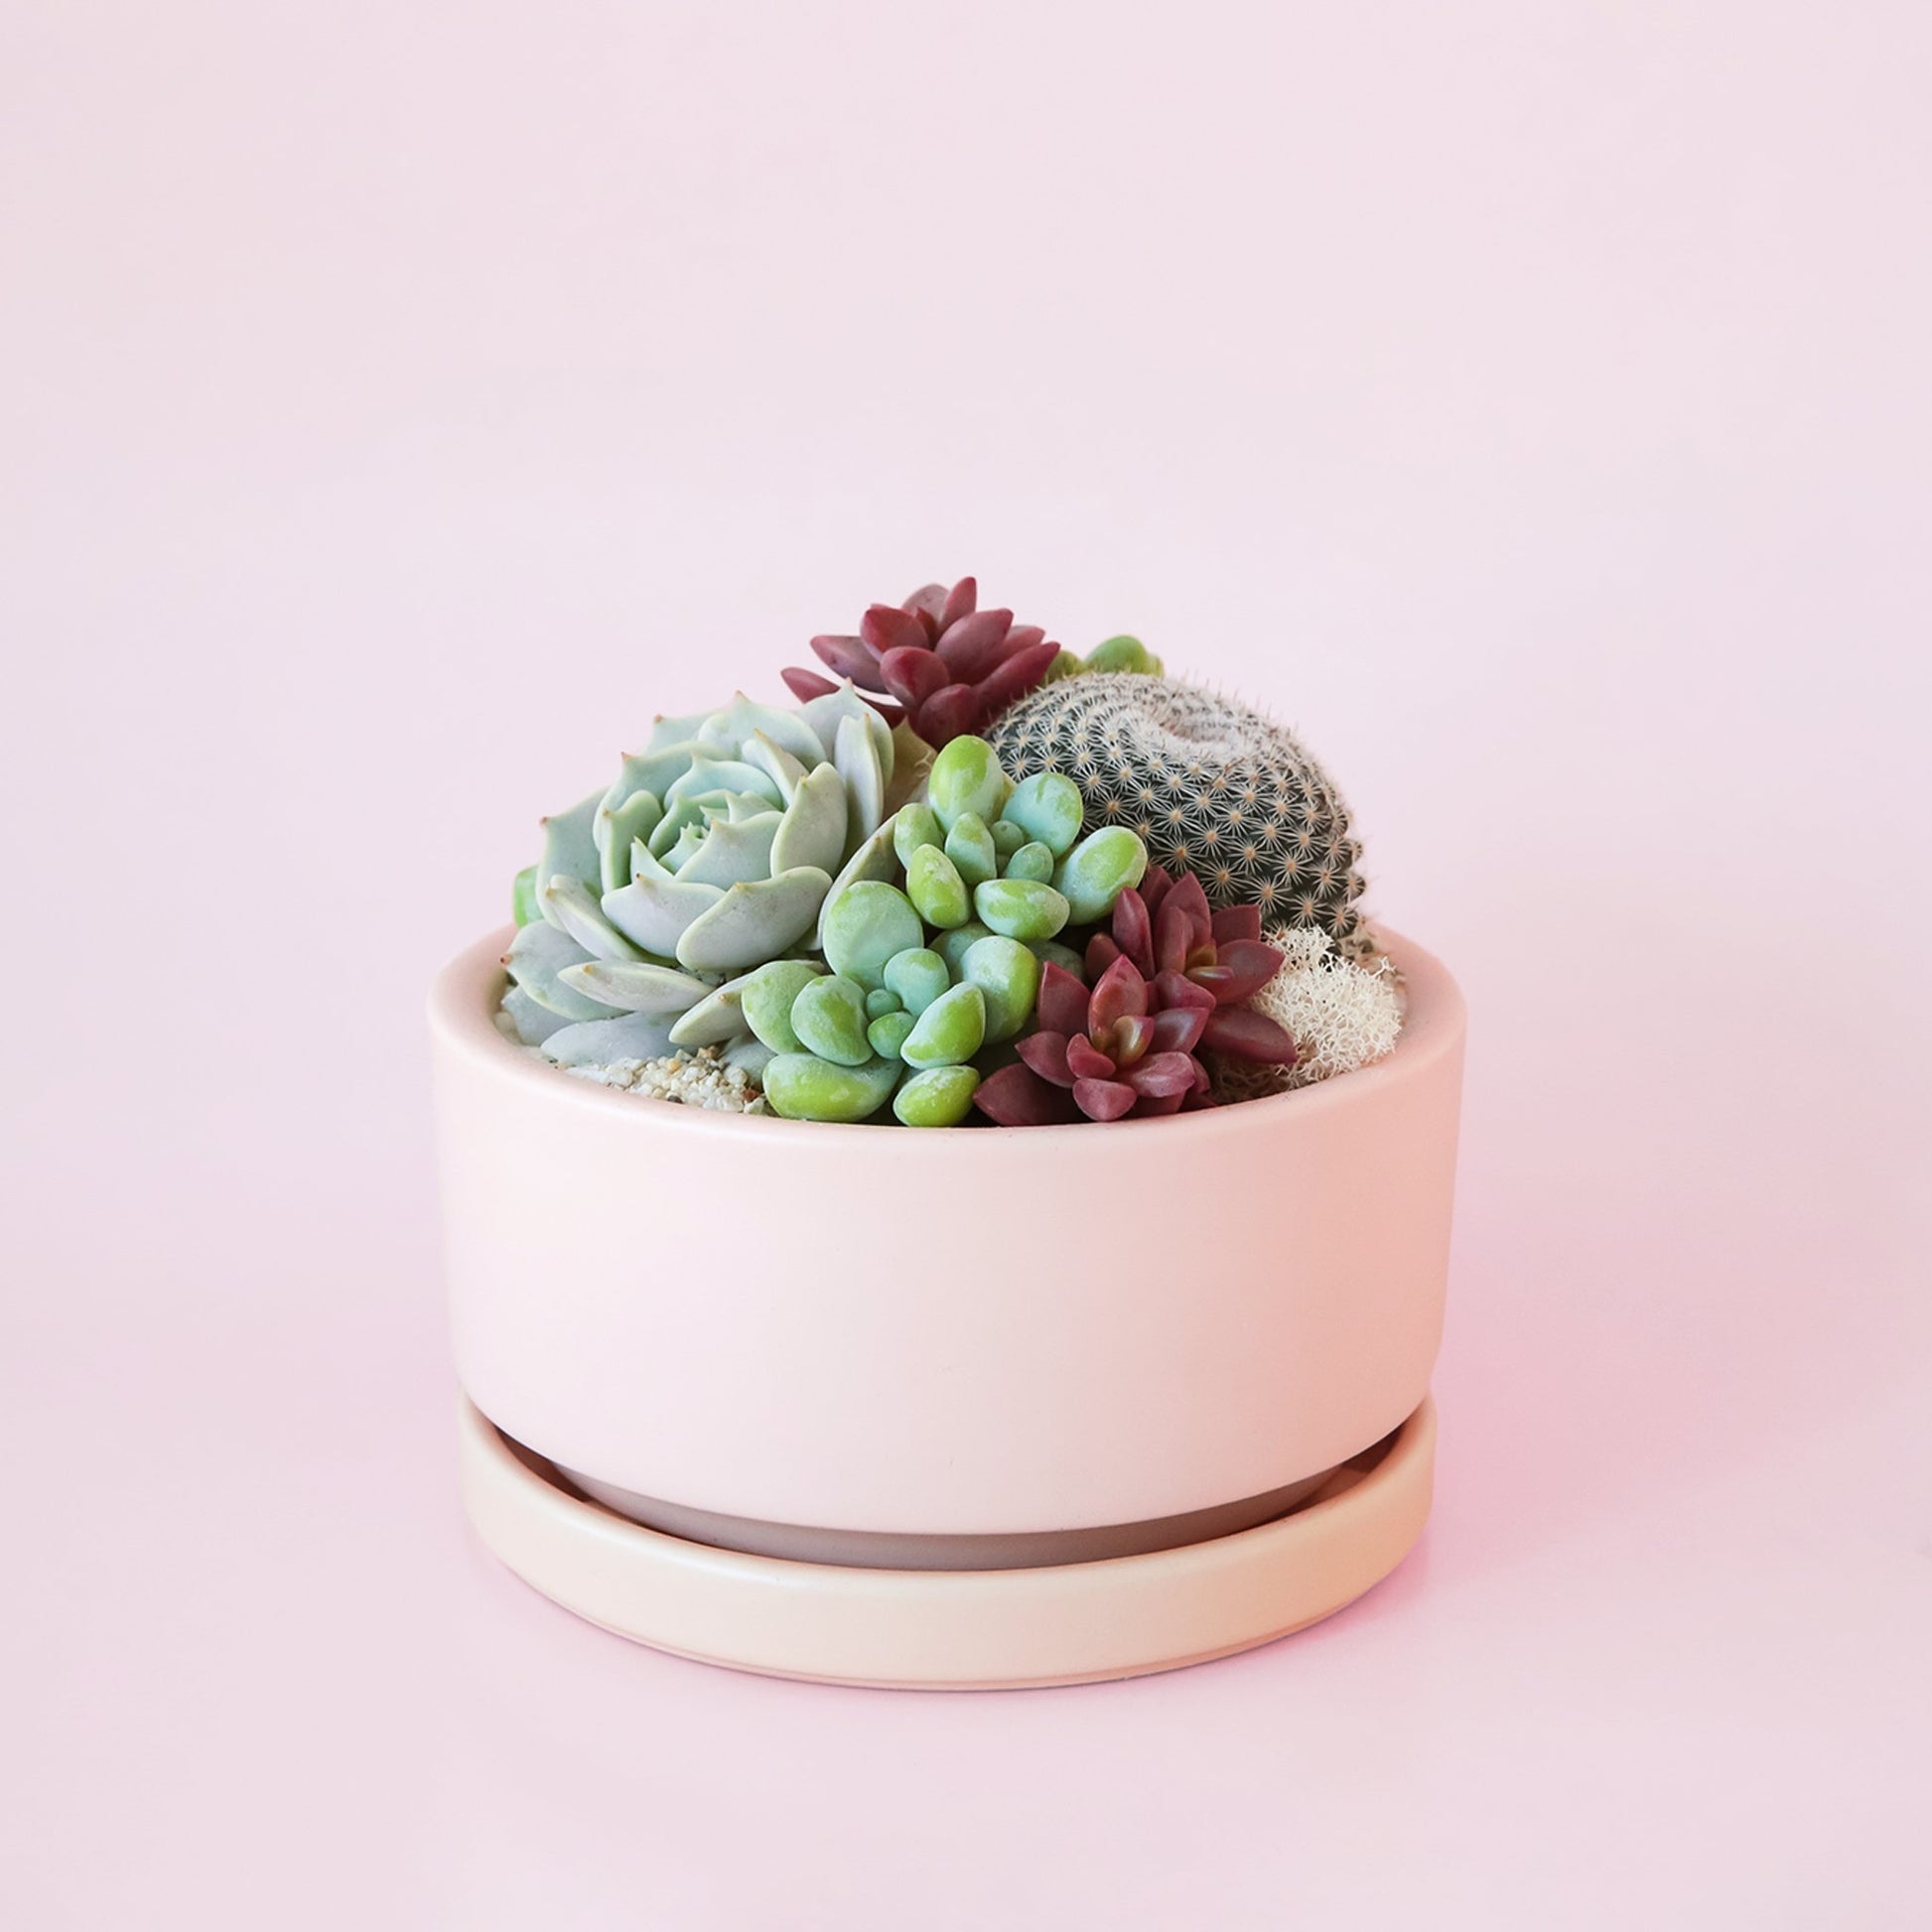 Small succulent planting arrangement planted in soft pink low bowl. The bowl is filled with a variety of cacti, succulents and moss.